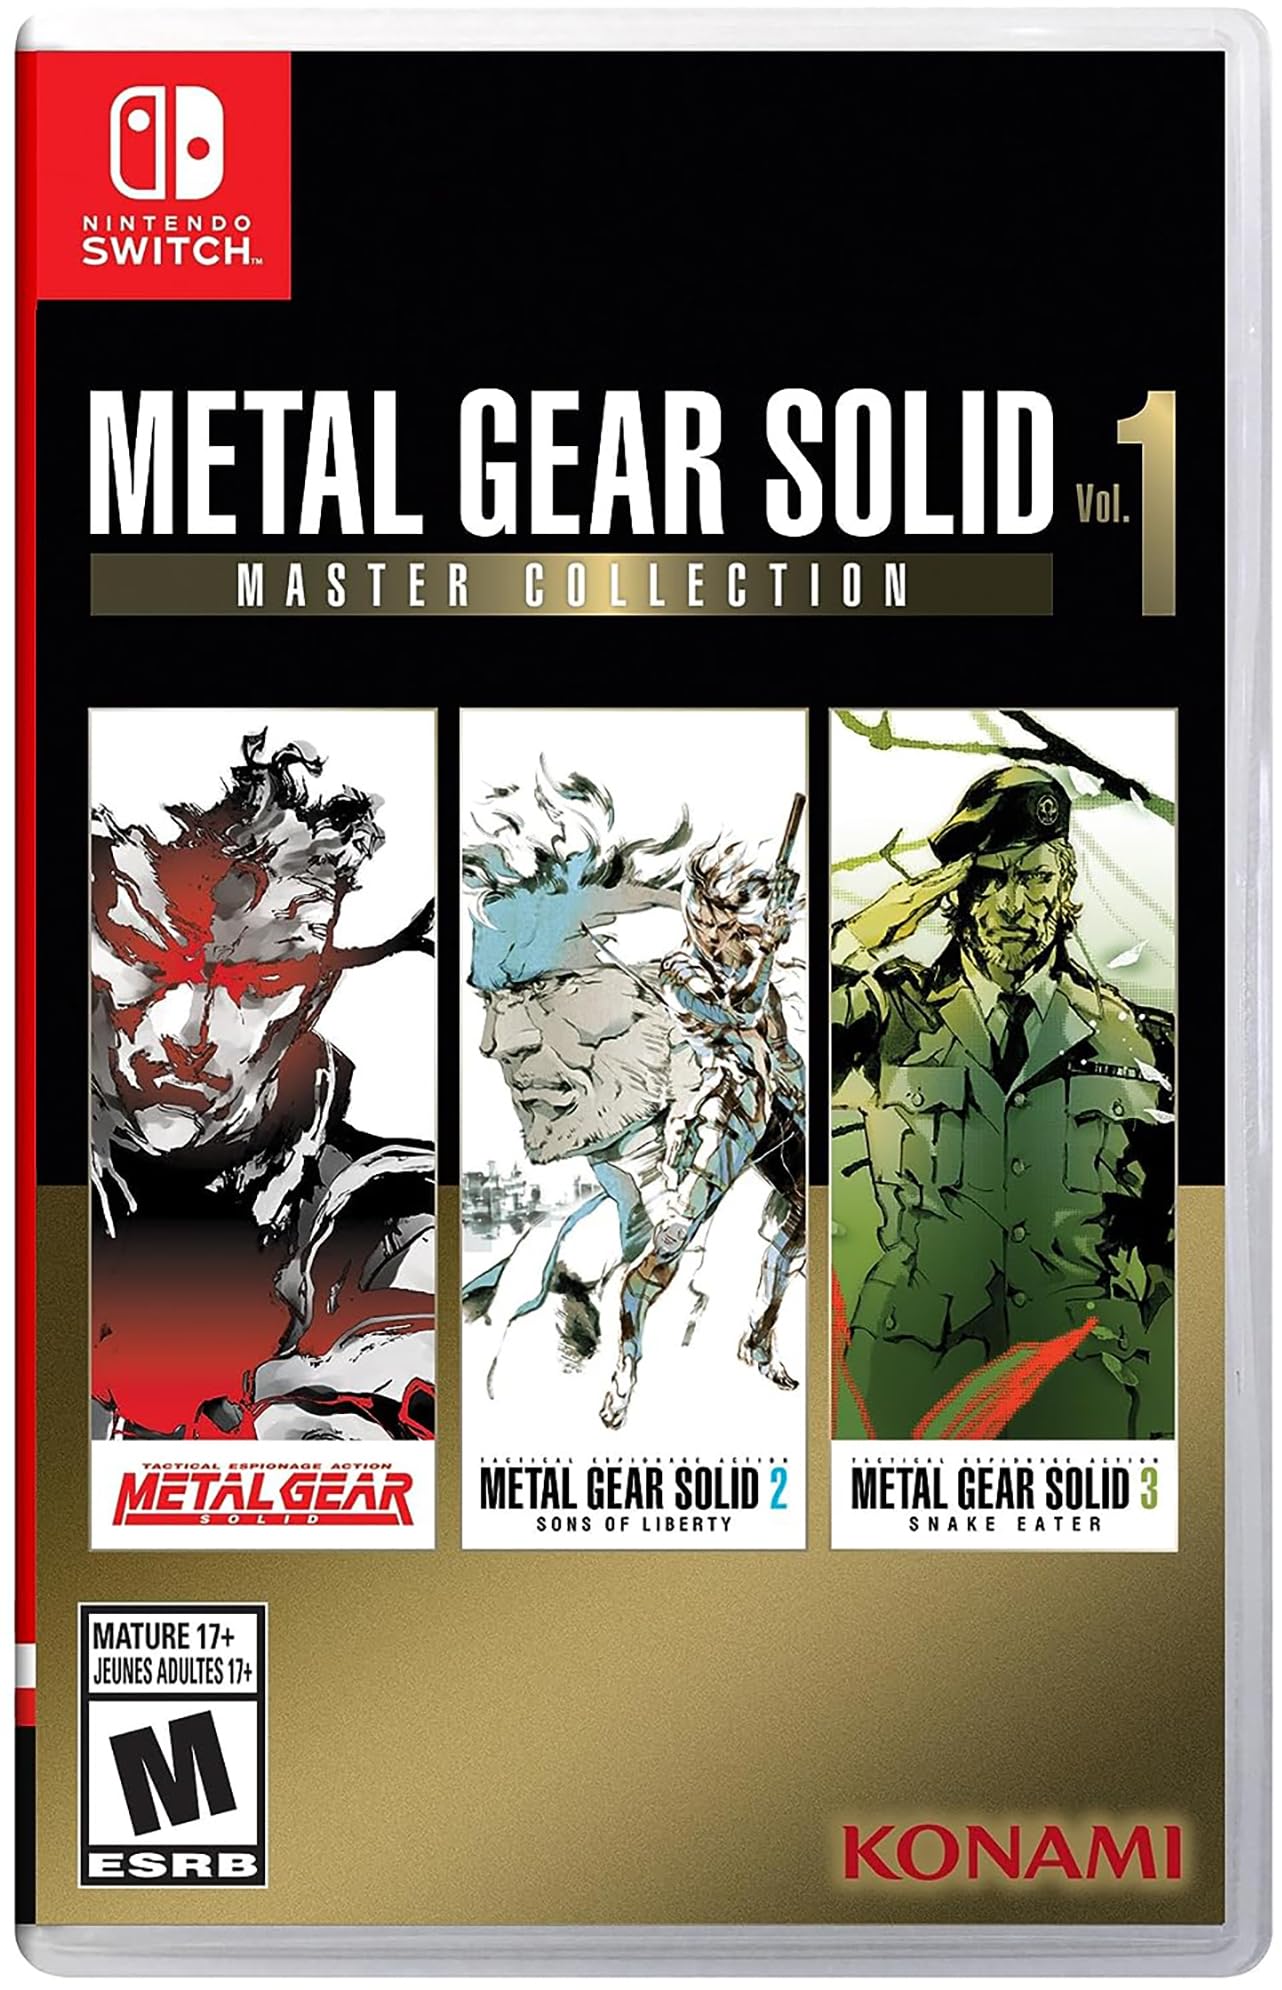 Metal Gear Solid: Master Collection Vol.1 (Nintendo Switch) $38 + Free Shipping